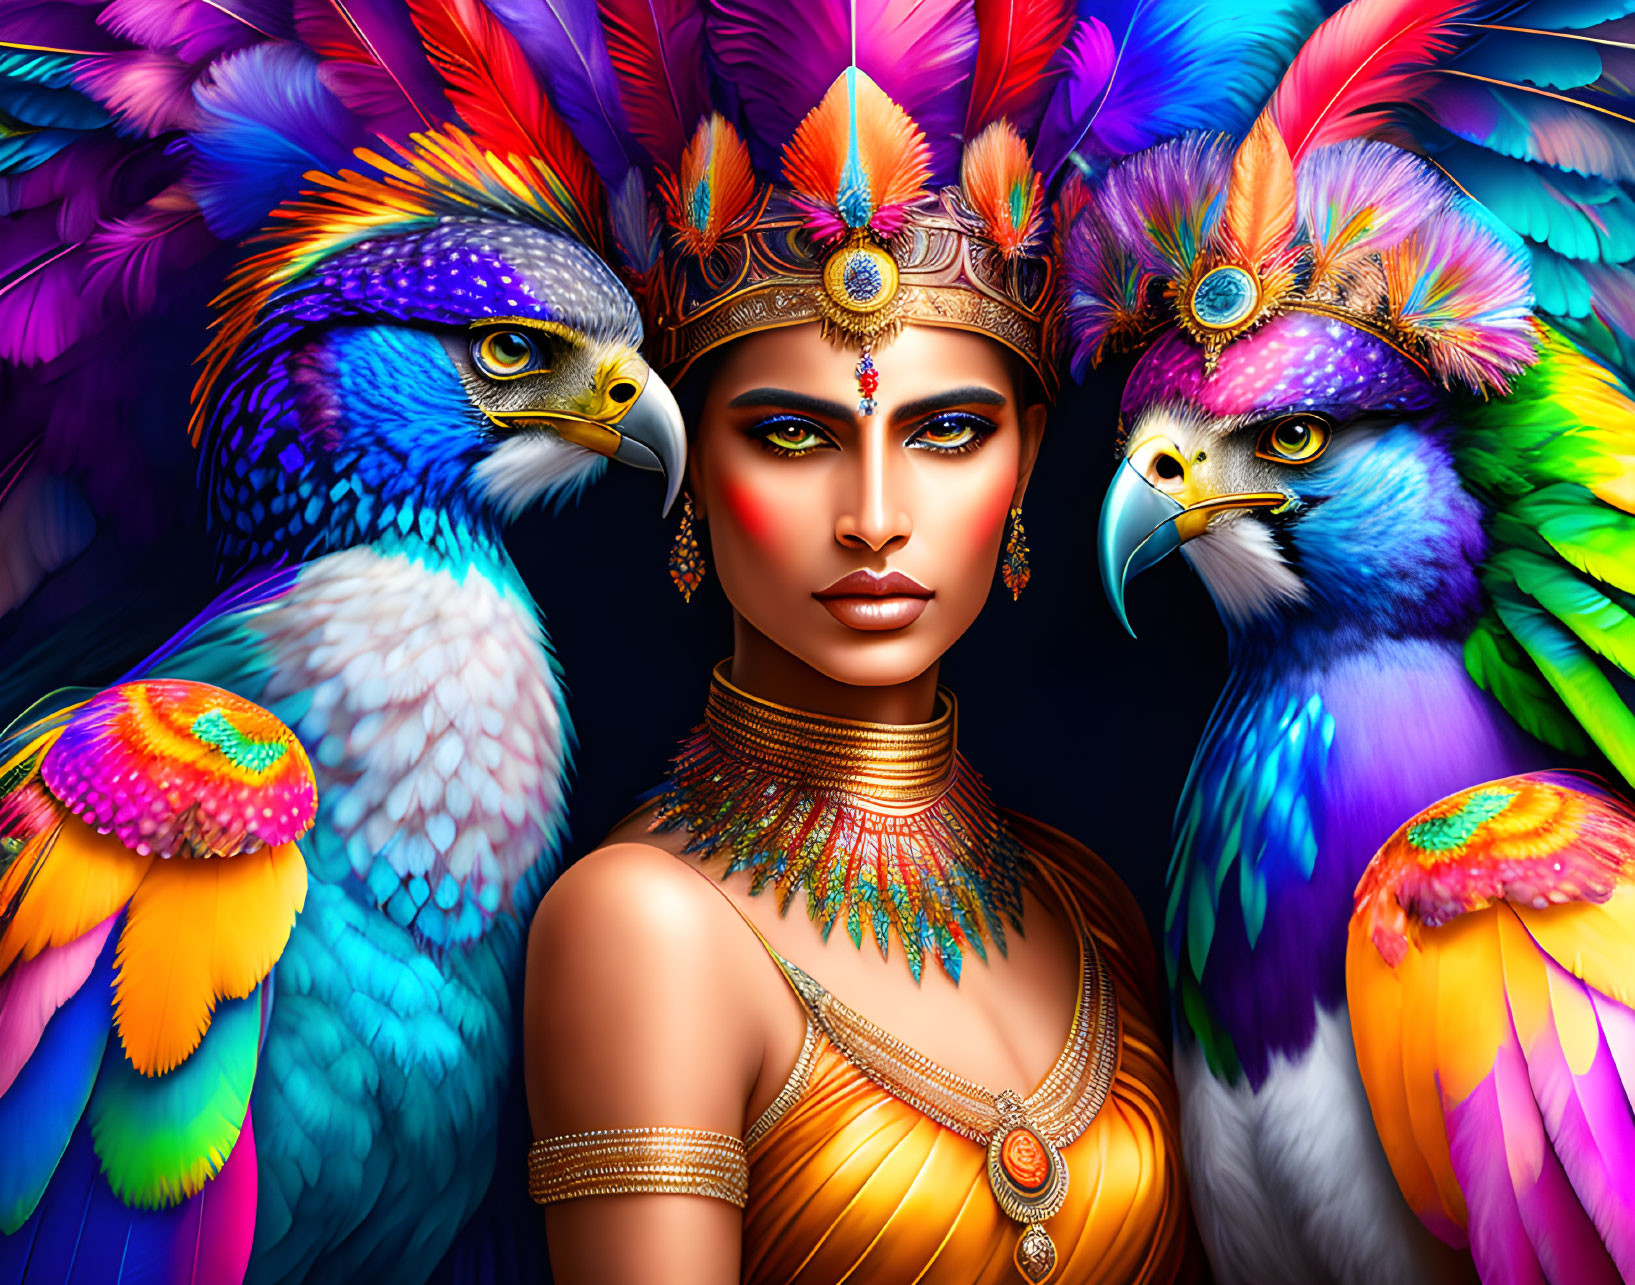 The queen of feathers with two beautiful colourful